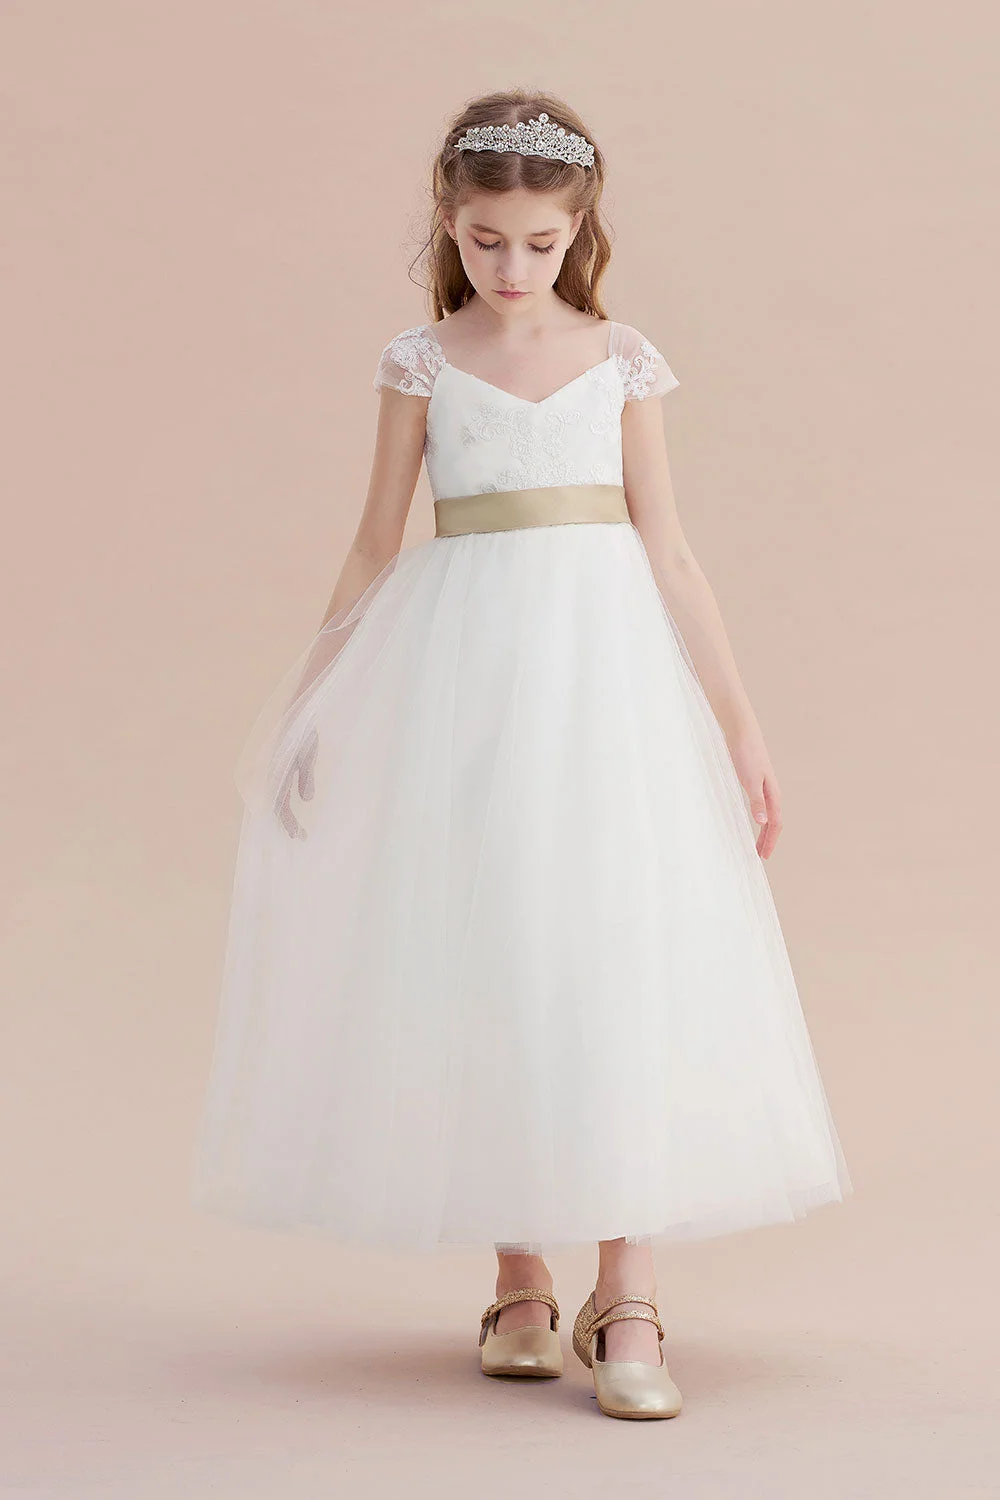 Daisda Cap Sleeve Sweetheart A-line Flower Girl Dress Tulle with Lace Ribbons